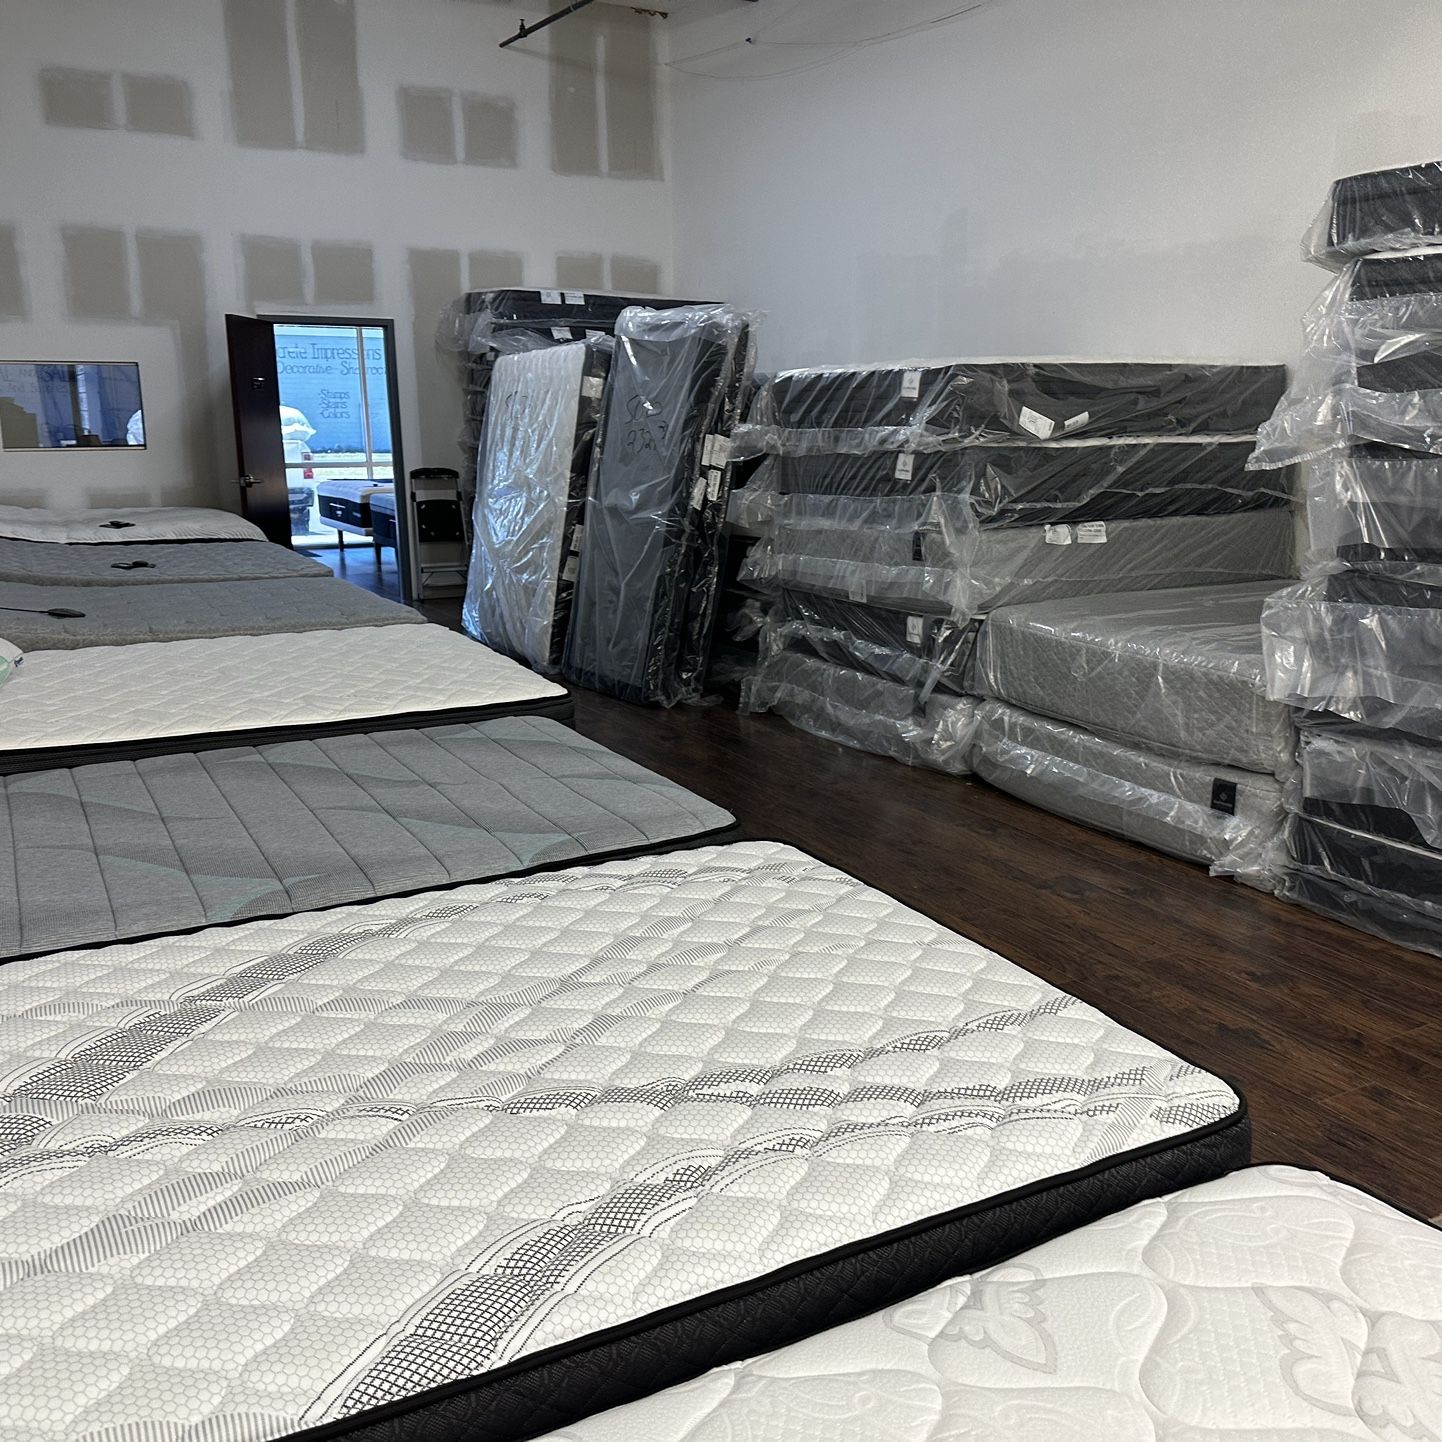 Mattresses 30-80% Off Today!